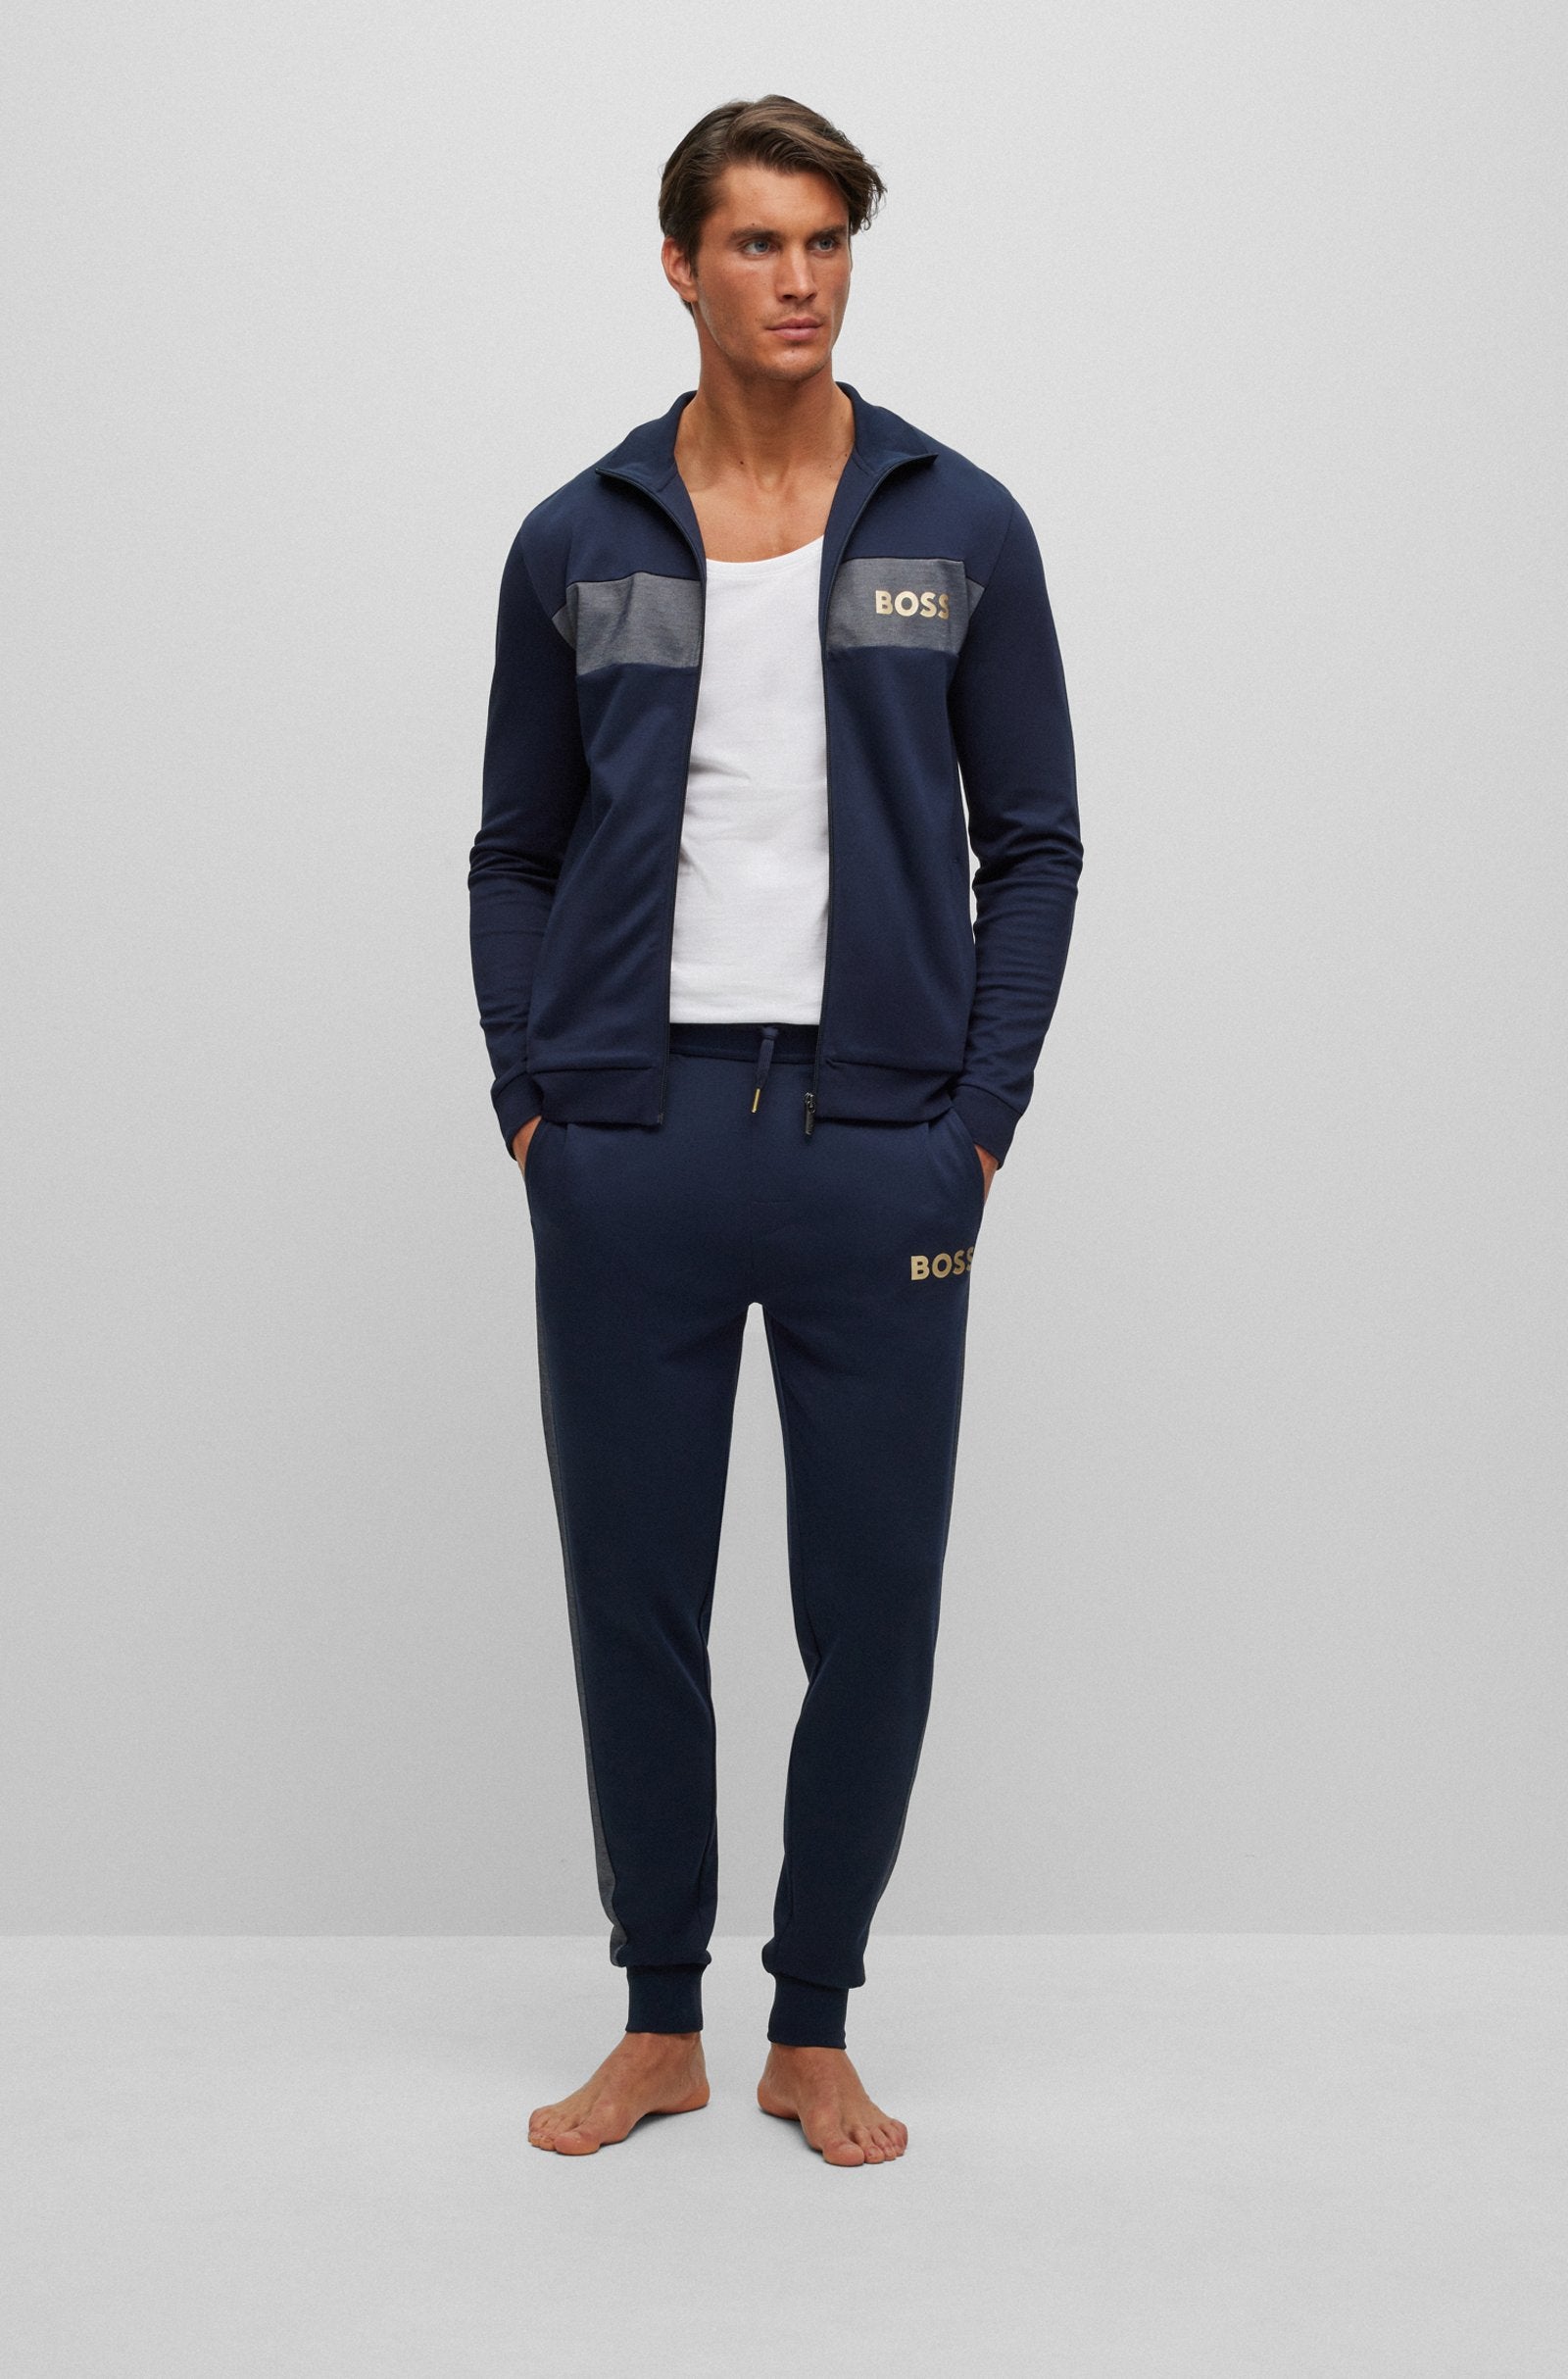 BOSS - Dark Blue SWEATPANTS WITH EMBROIDERED LOGO 50503052 403